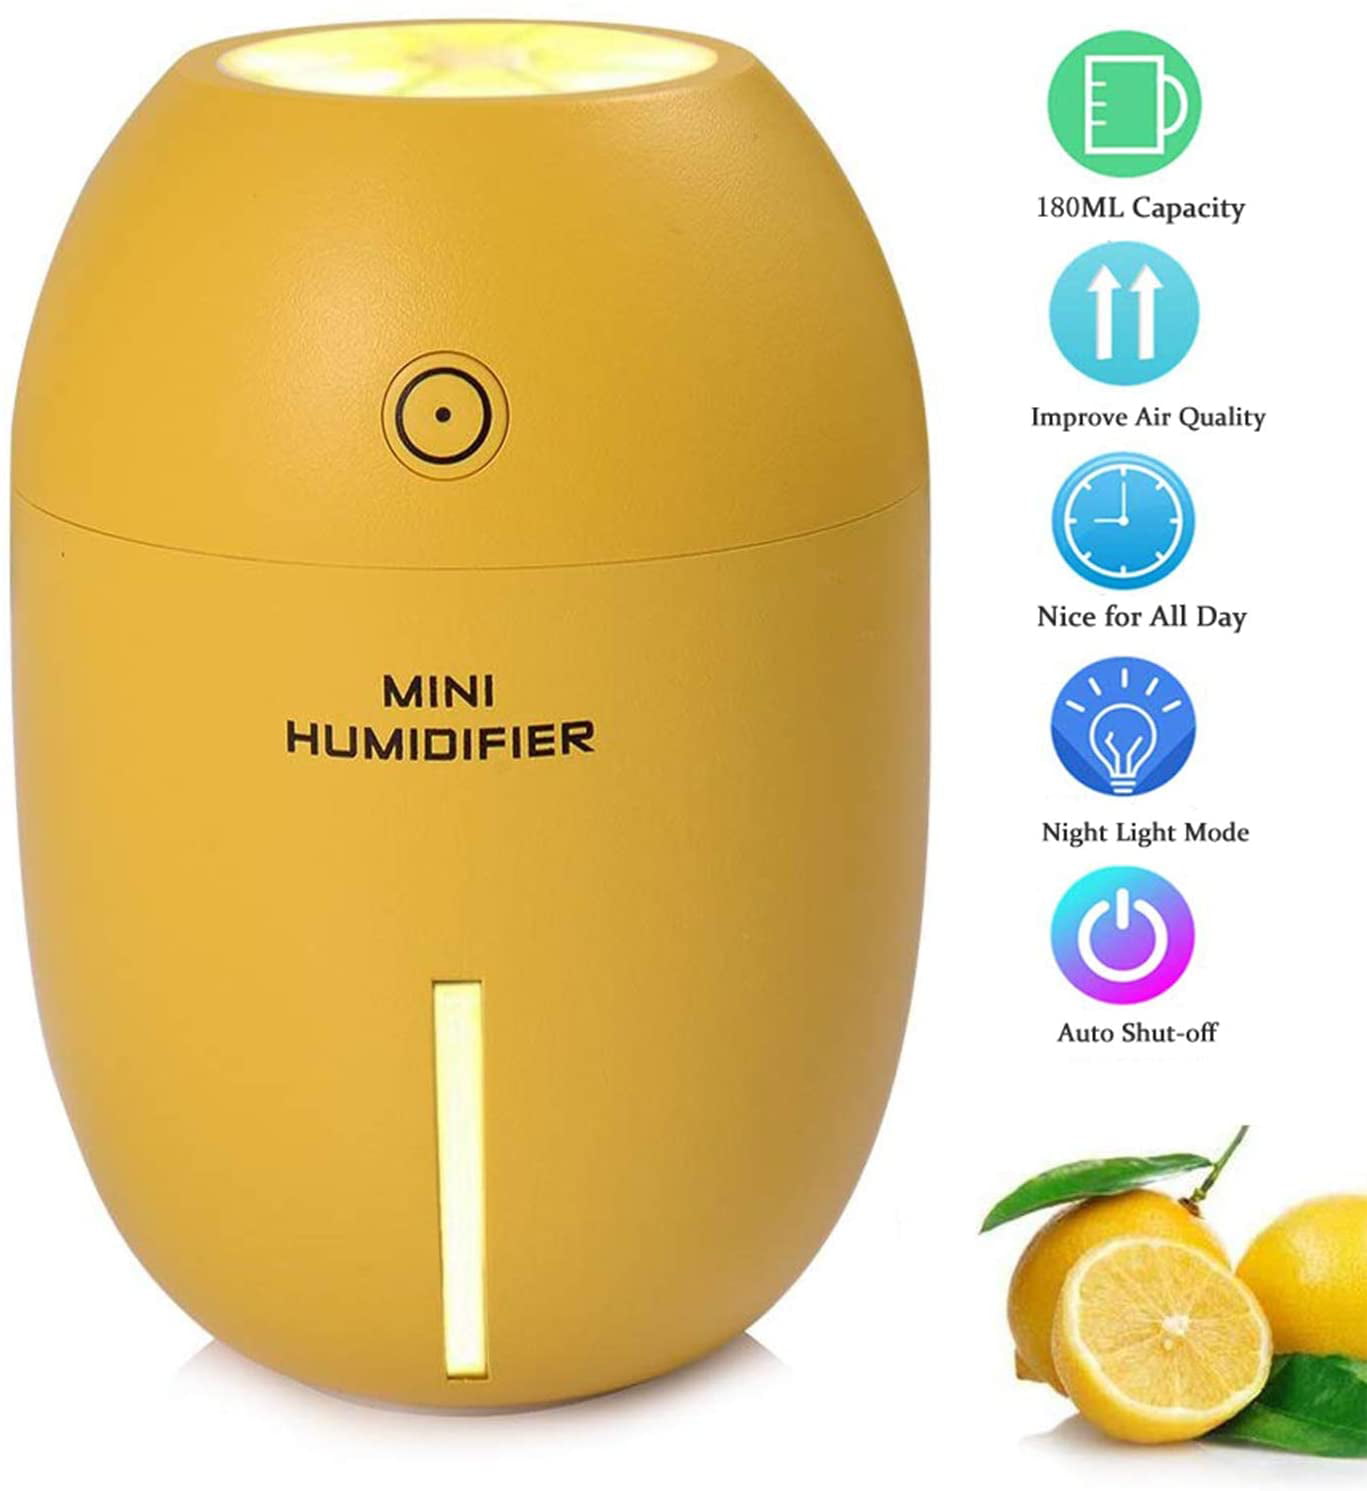 Holiday Gift Car 180 ml Black 1 Baby Humidifier with Two Spray Modes Silent with 7 Colour LED Lights USB Portable Air Humidifier for Bedroom Office 